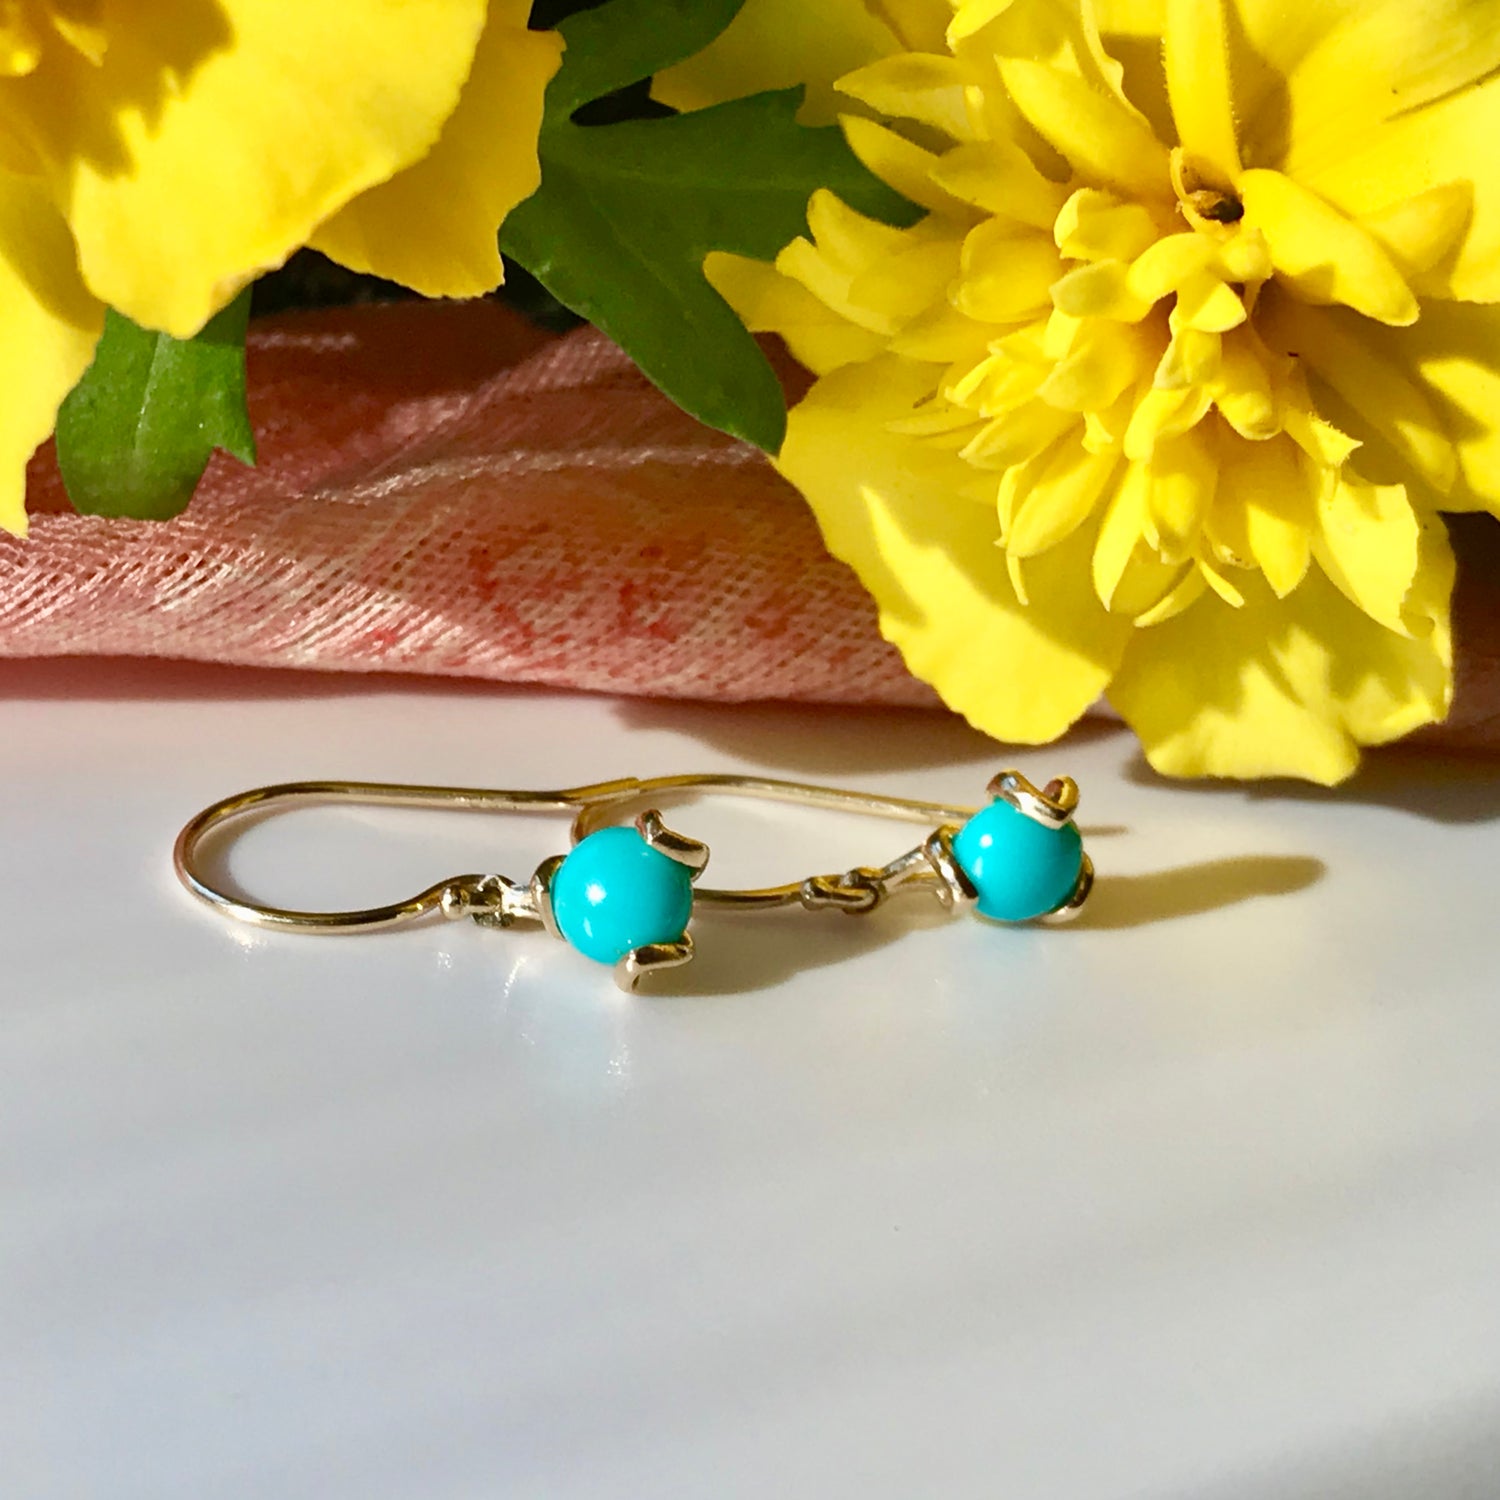 Graduated Turquoise Drop Earrings in Sterling Silver